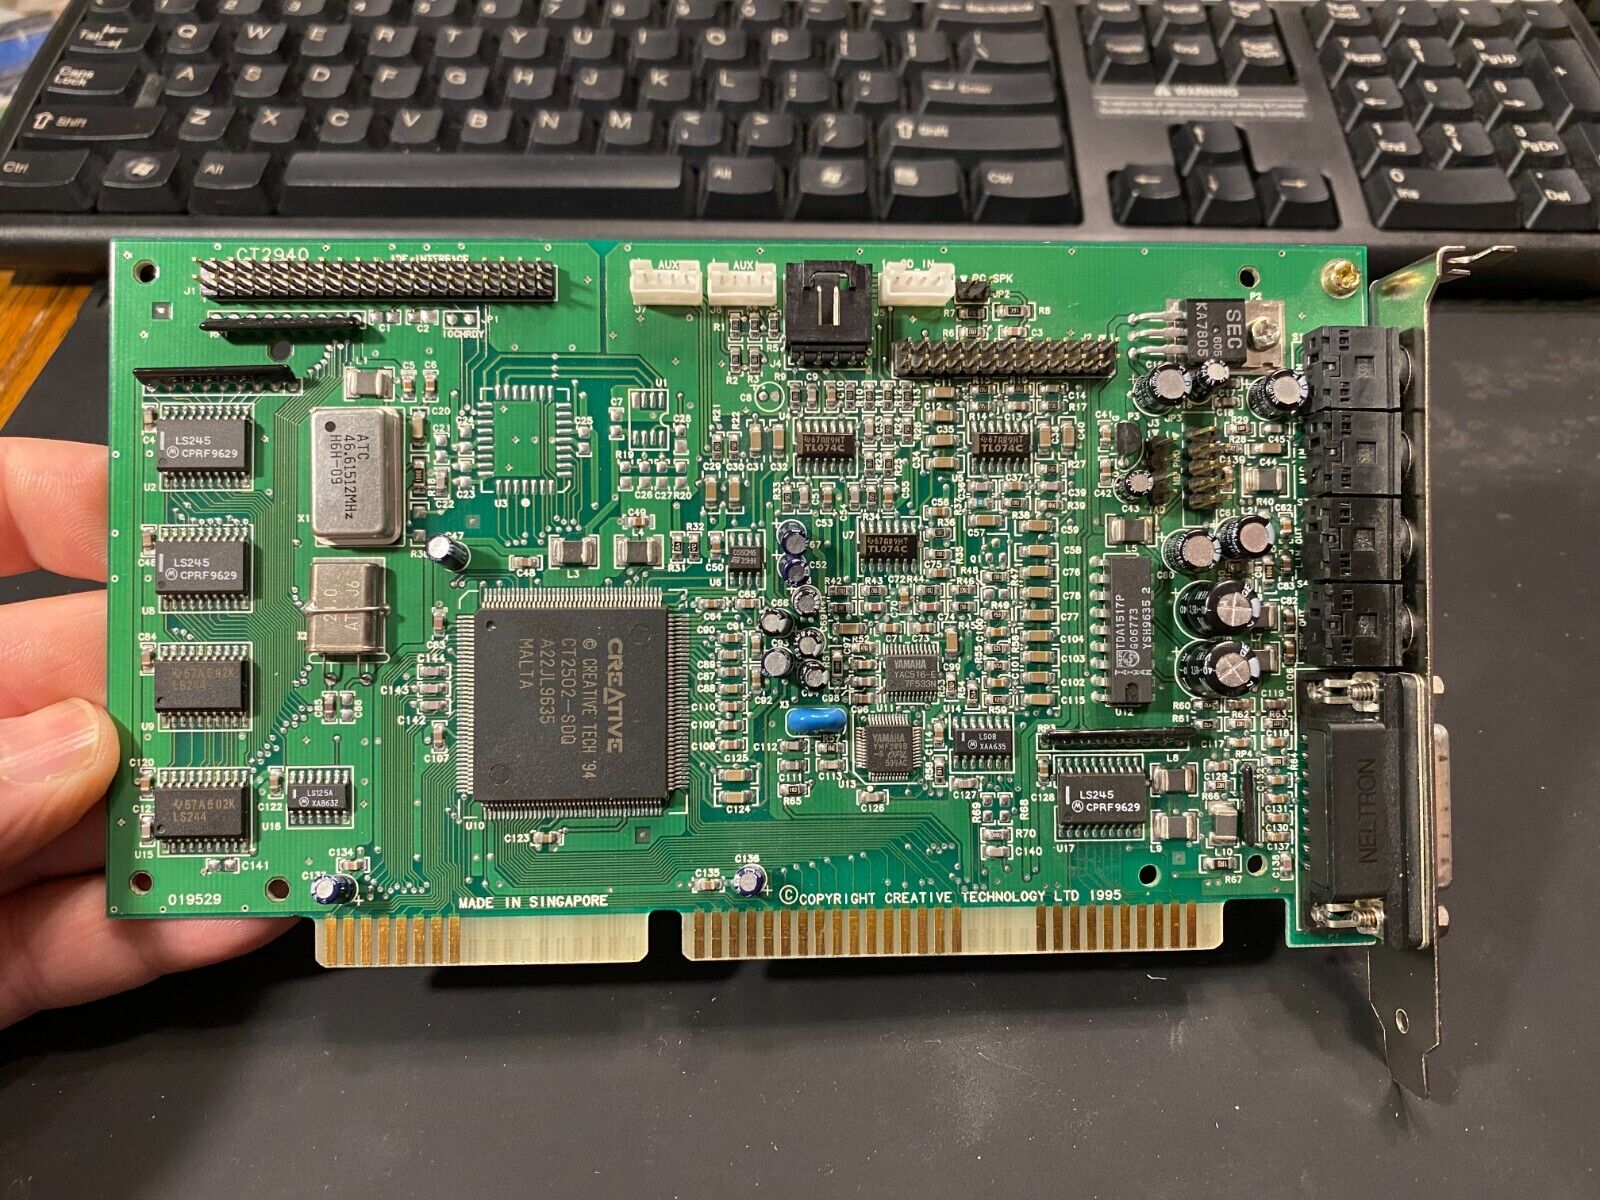 Retail Sound Blaster CT2940 PnP ISA OPL3 Working - Fully tested with driver CD.